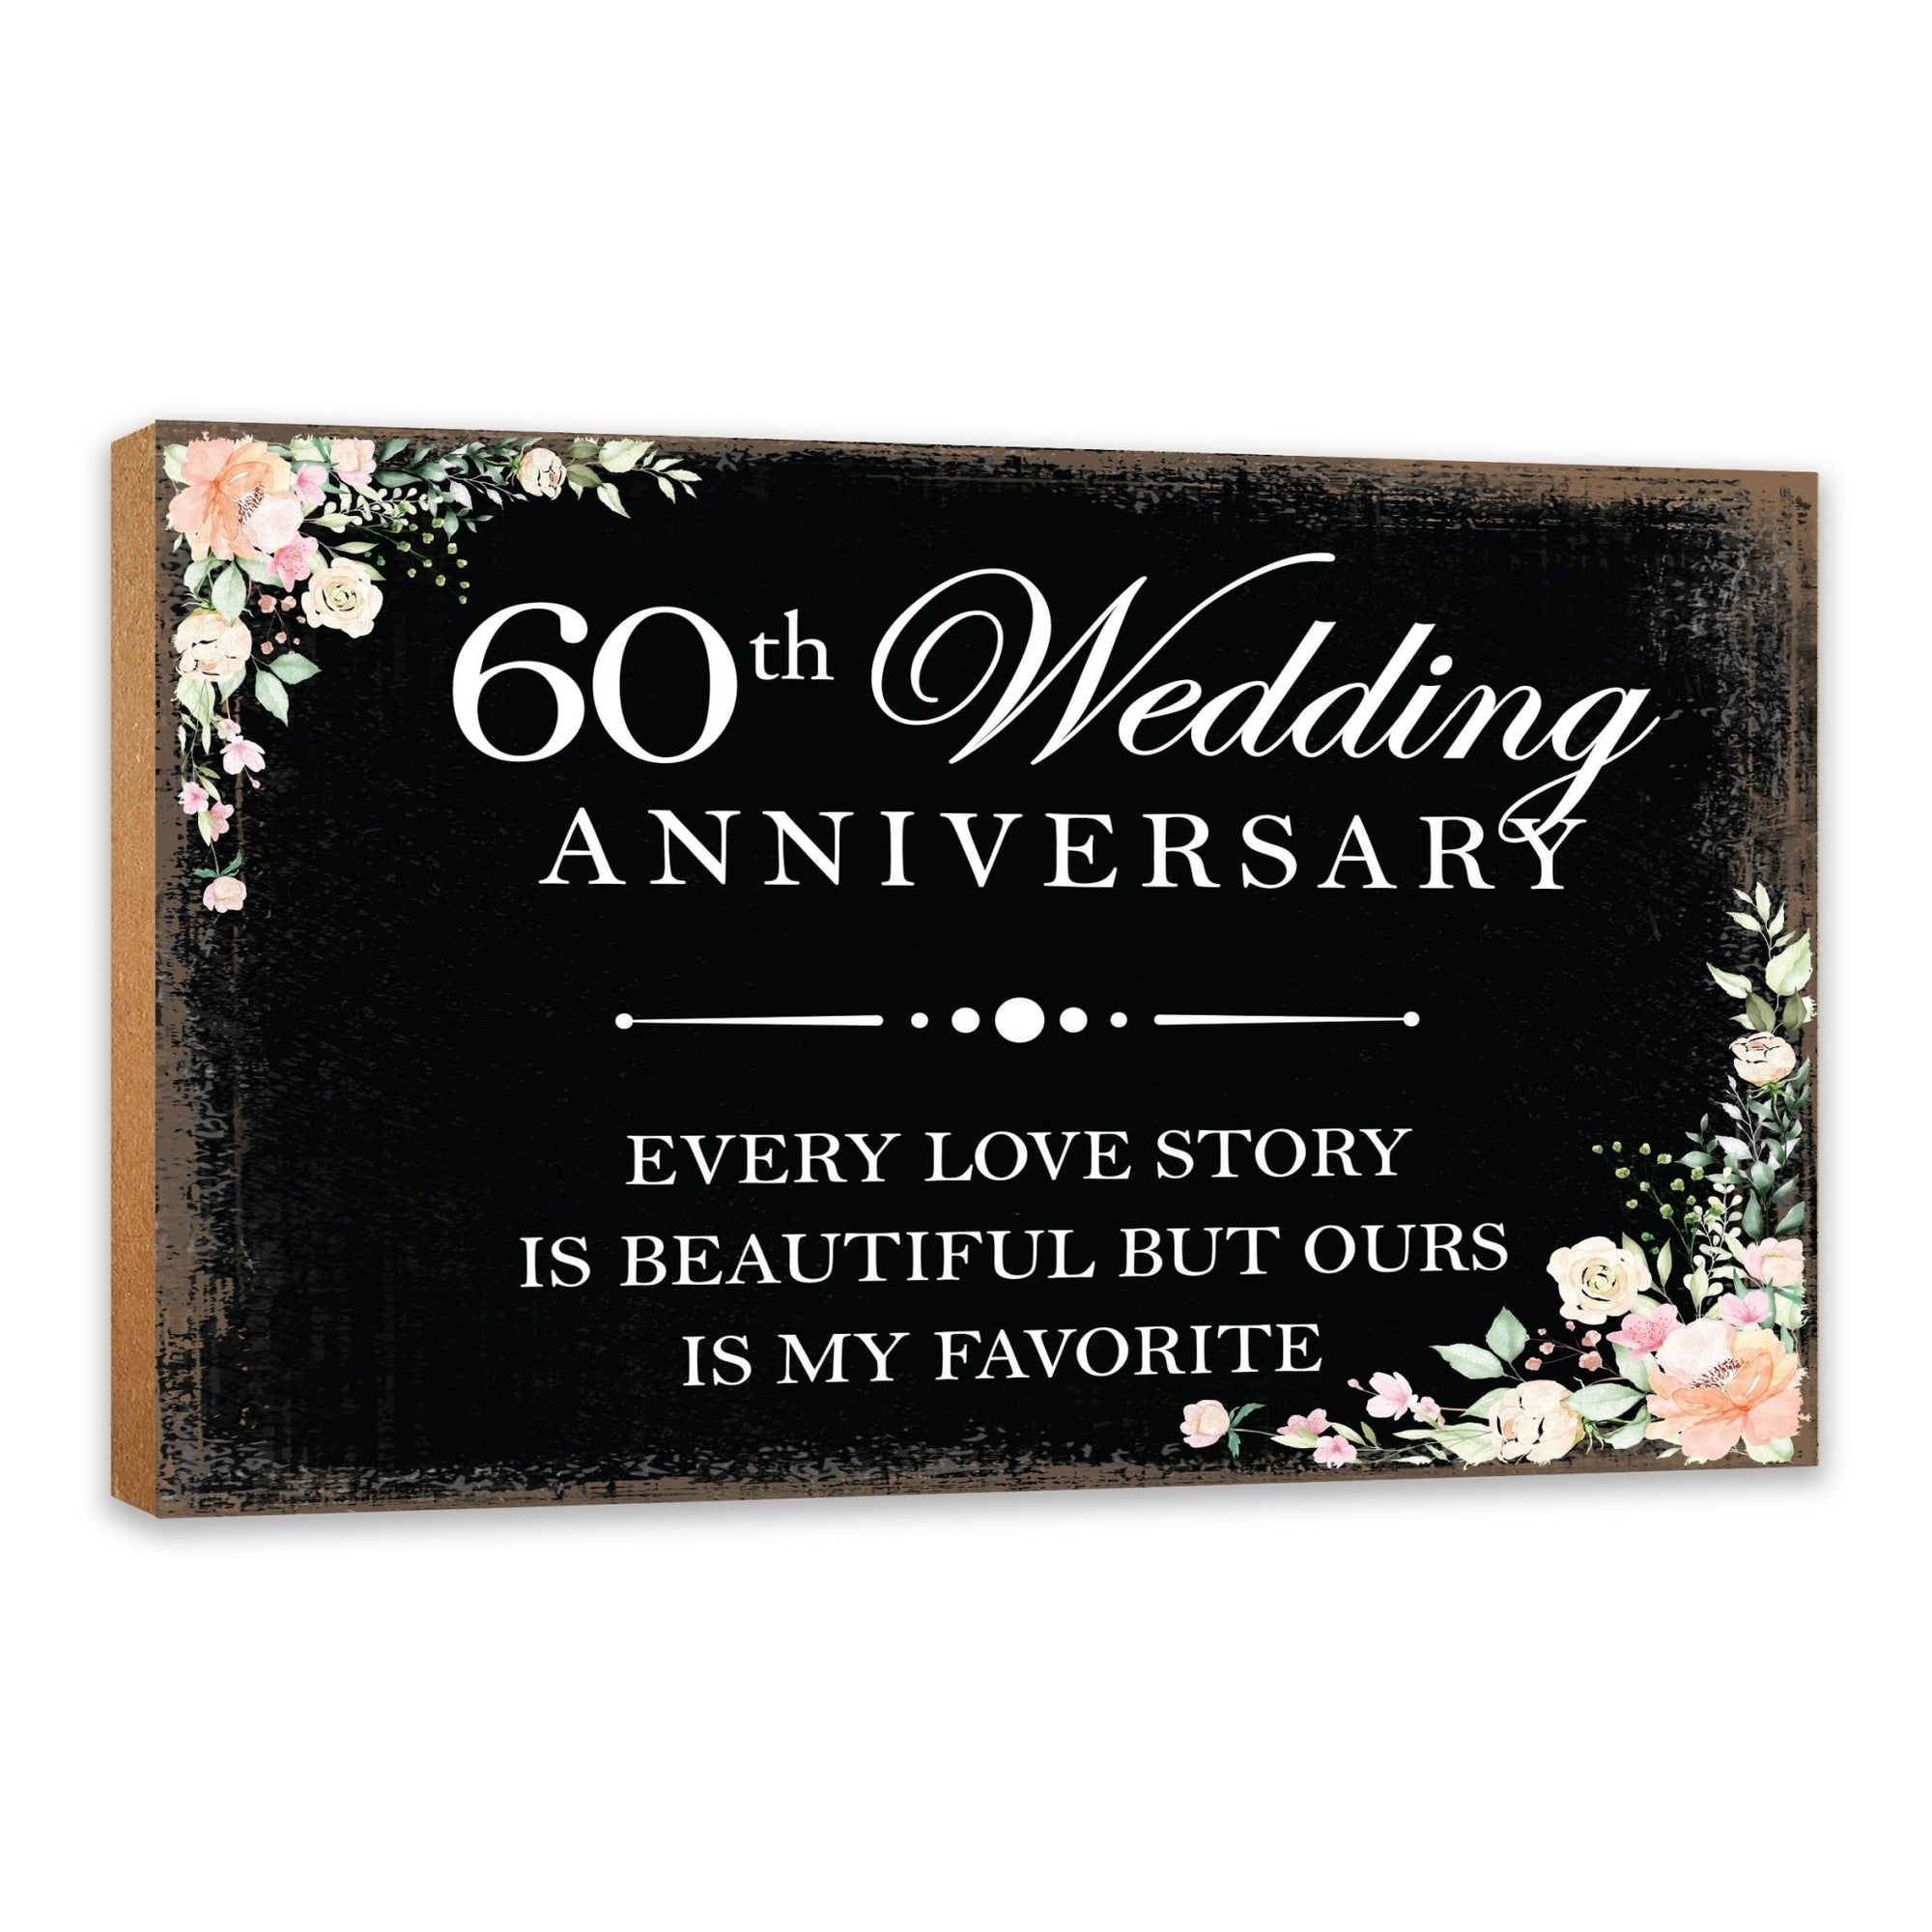 60th Wedding Anniversary Unique Shelf Decor and Tabletop Signs Gift for Couples - Every Love Story - LifeSong Milestones